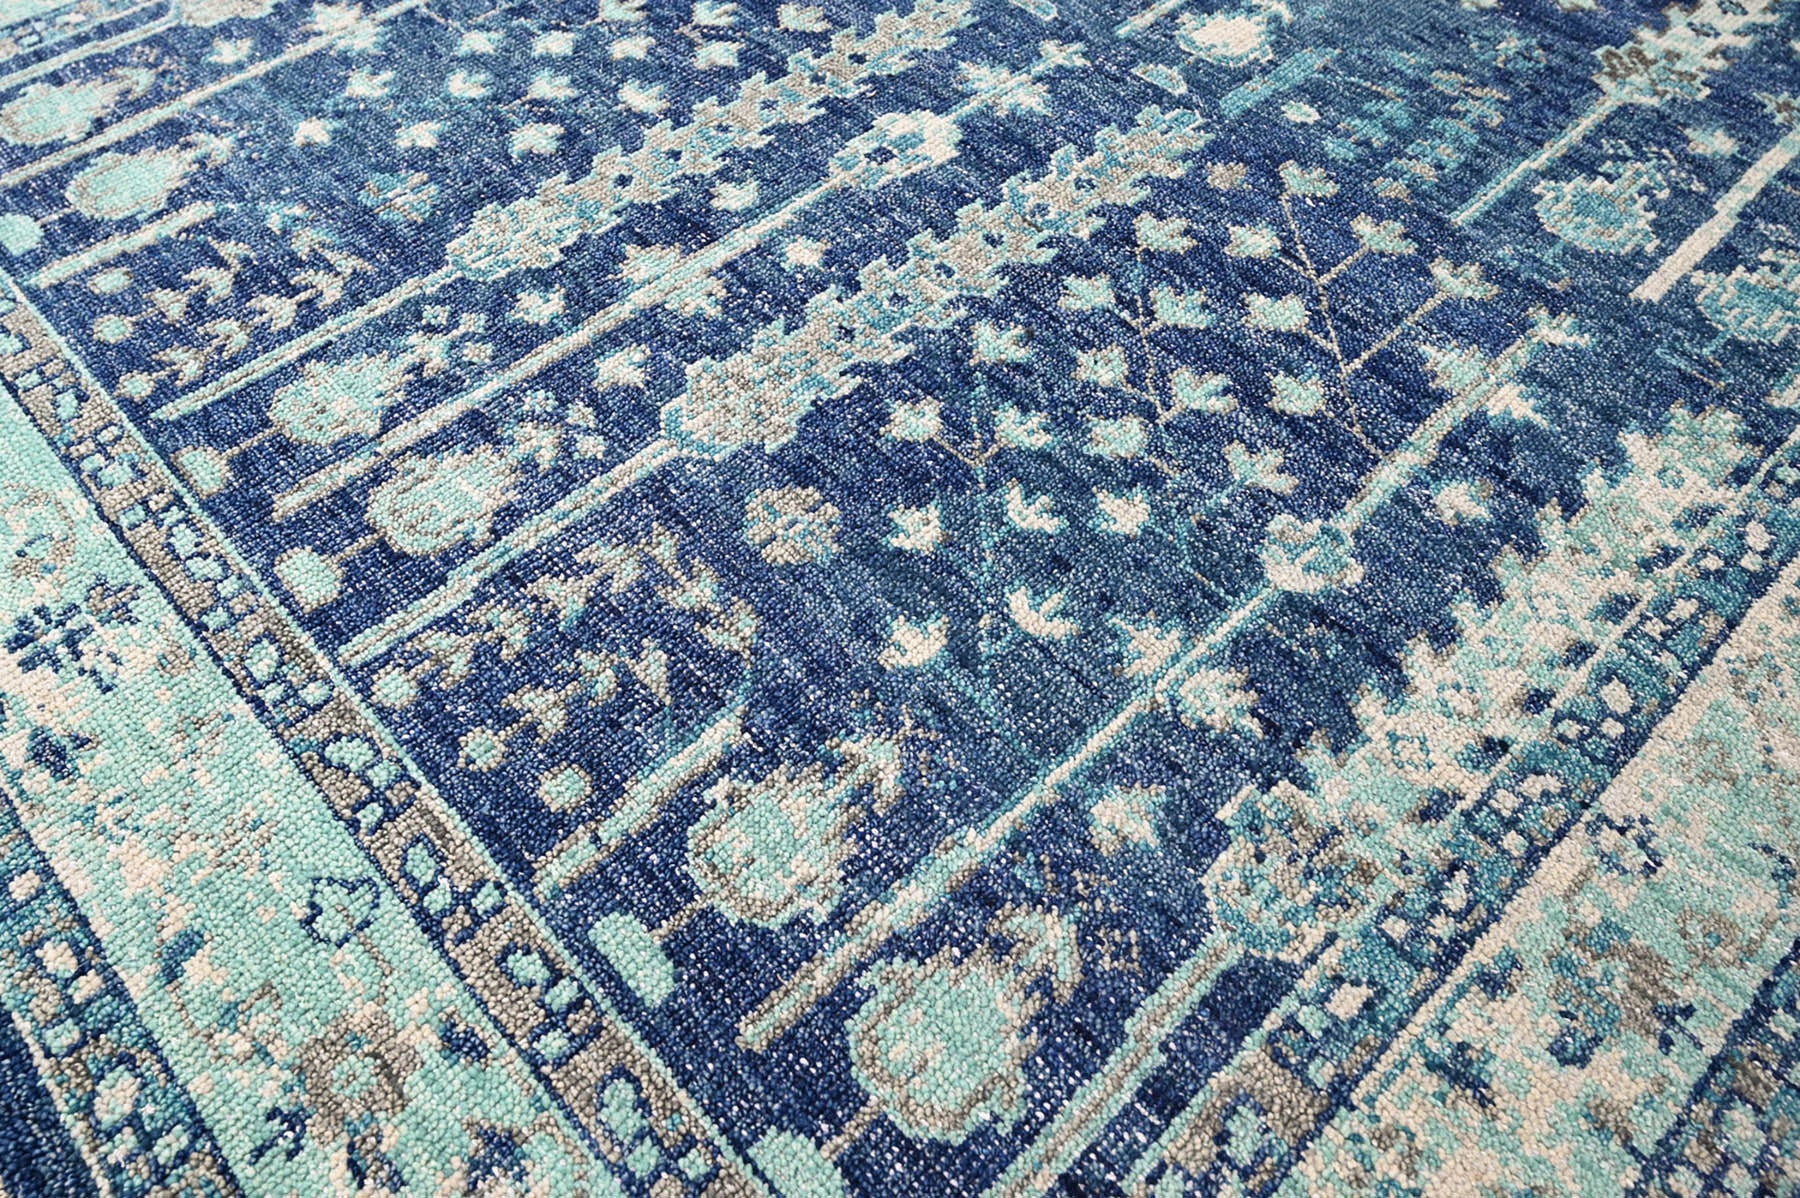 Multi Size Blue, Aqua Hand Knotted Arts & Crafts 100% Wool Turkish Oushak Traditional Oriental Area Rug